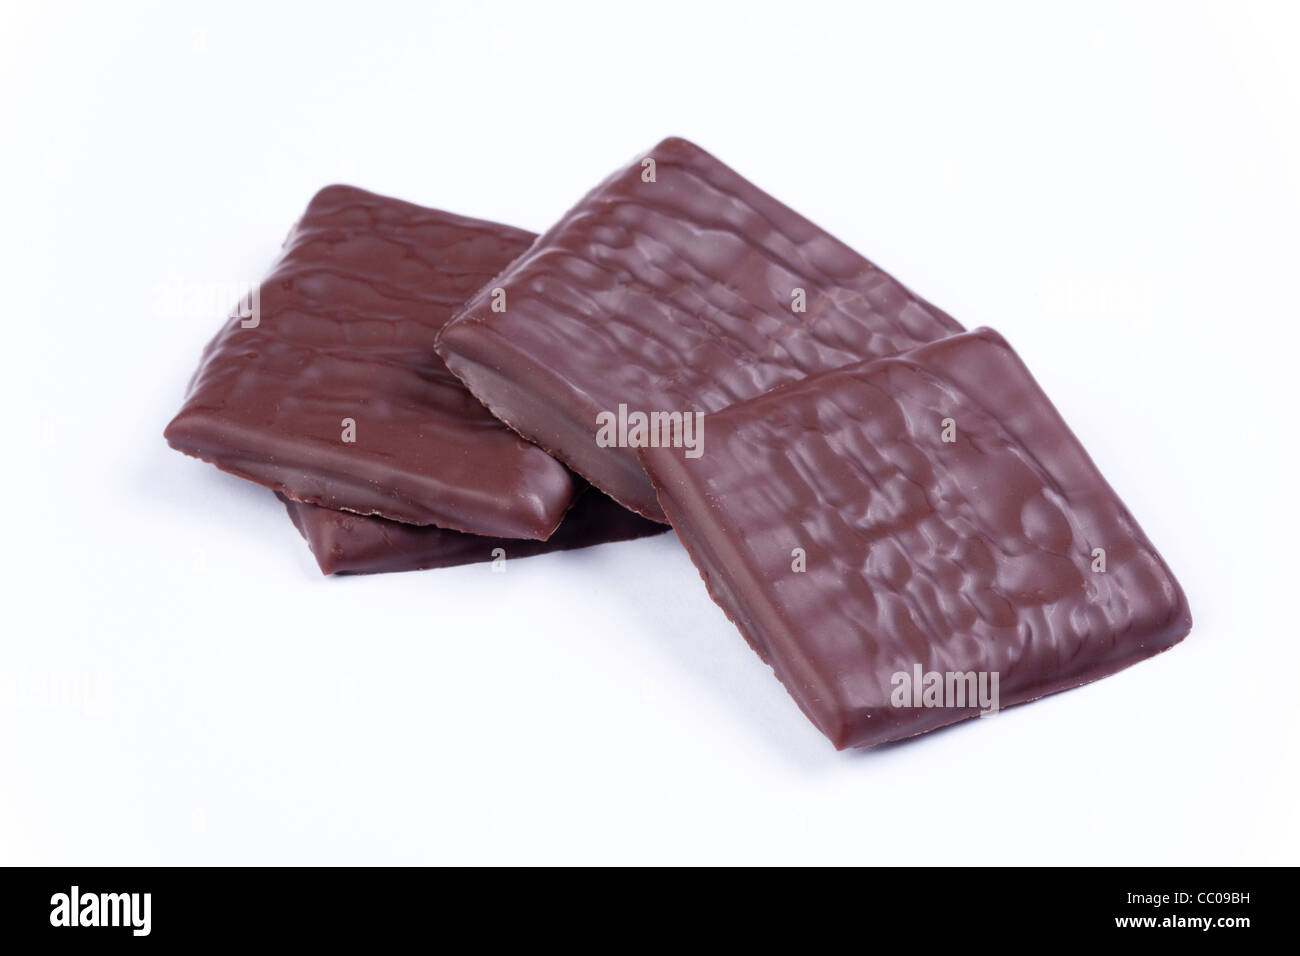 After Eight Mint Chocolate Thins Bars Price in India - Buy After